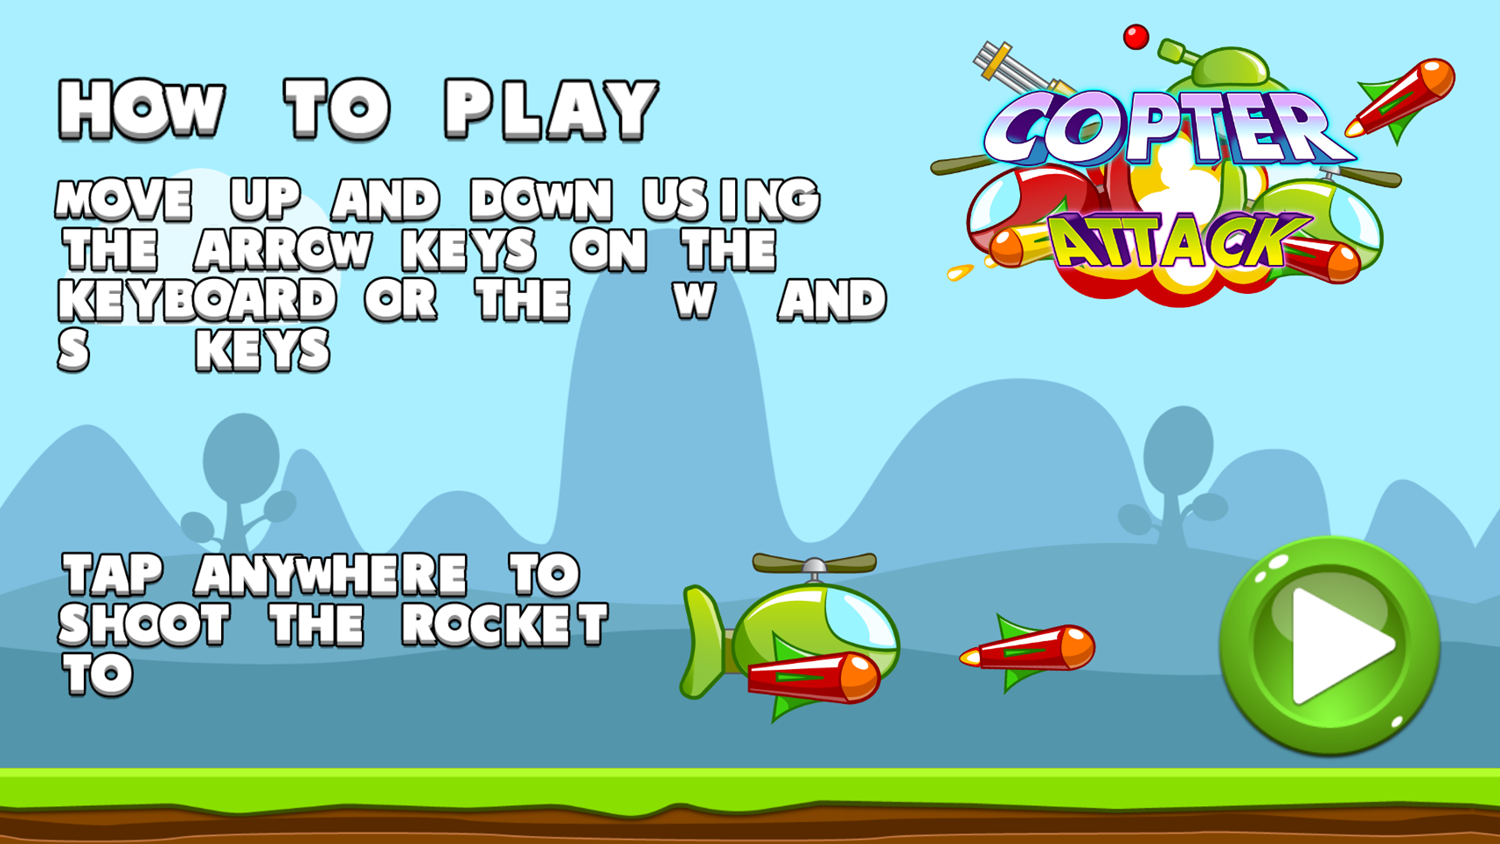 Copter Attack Game How To Play Screenshot.